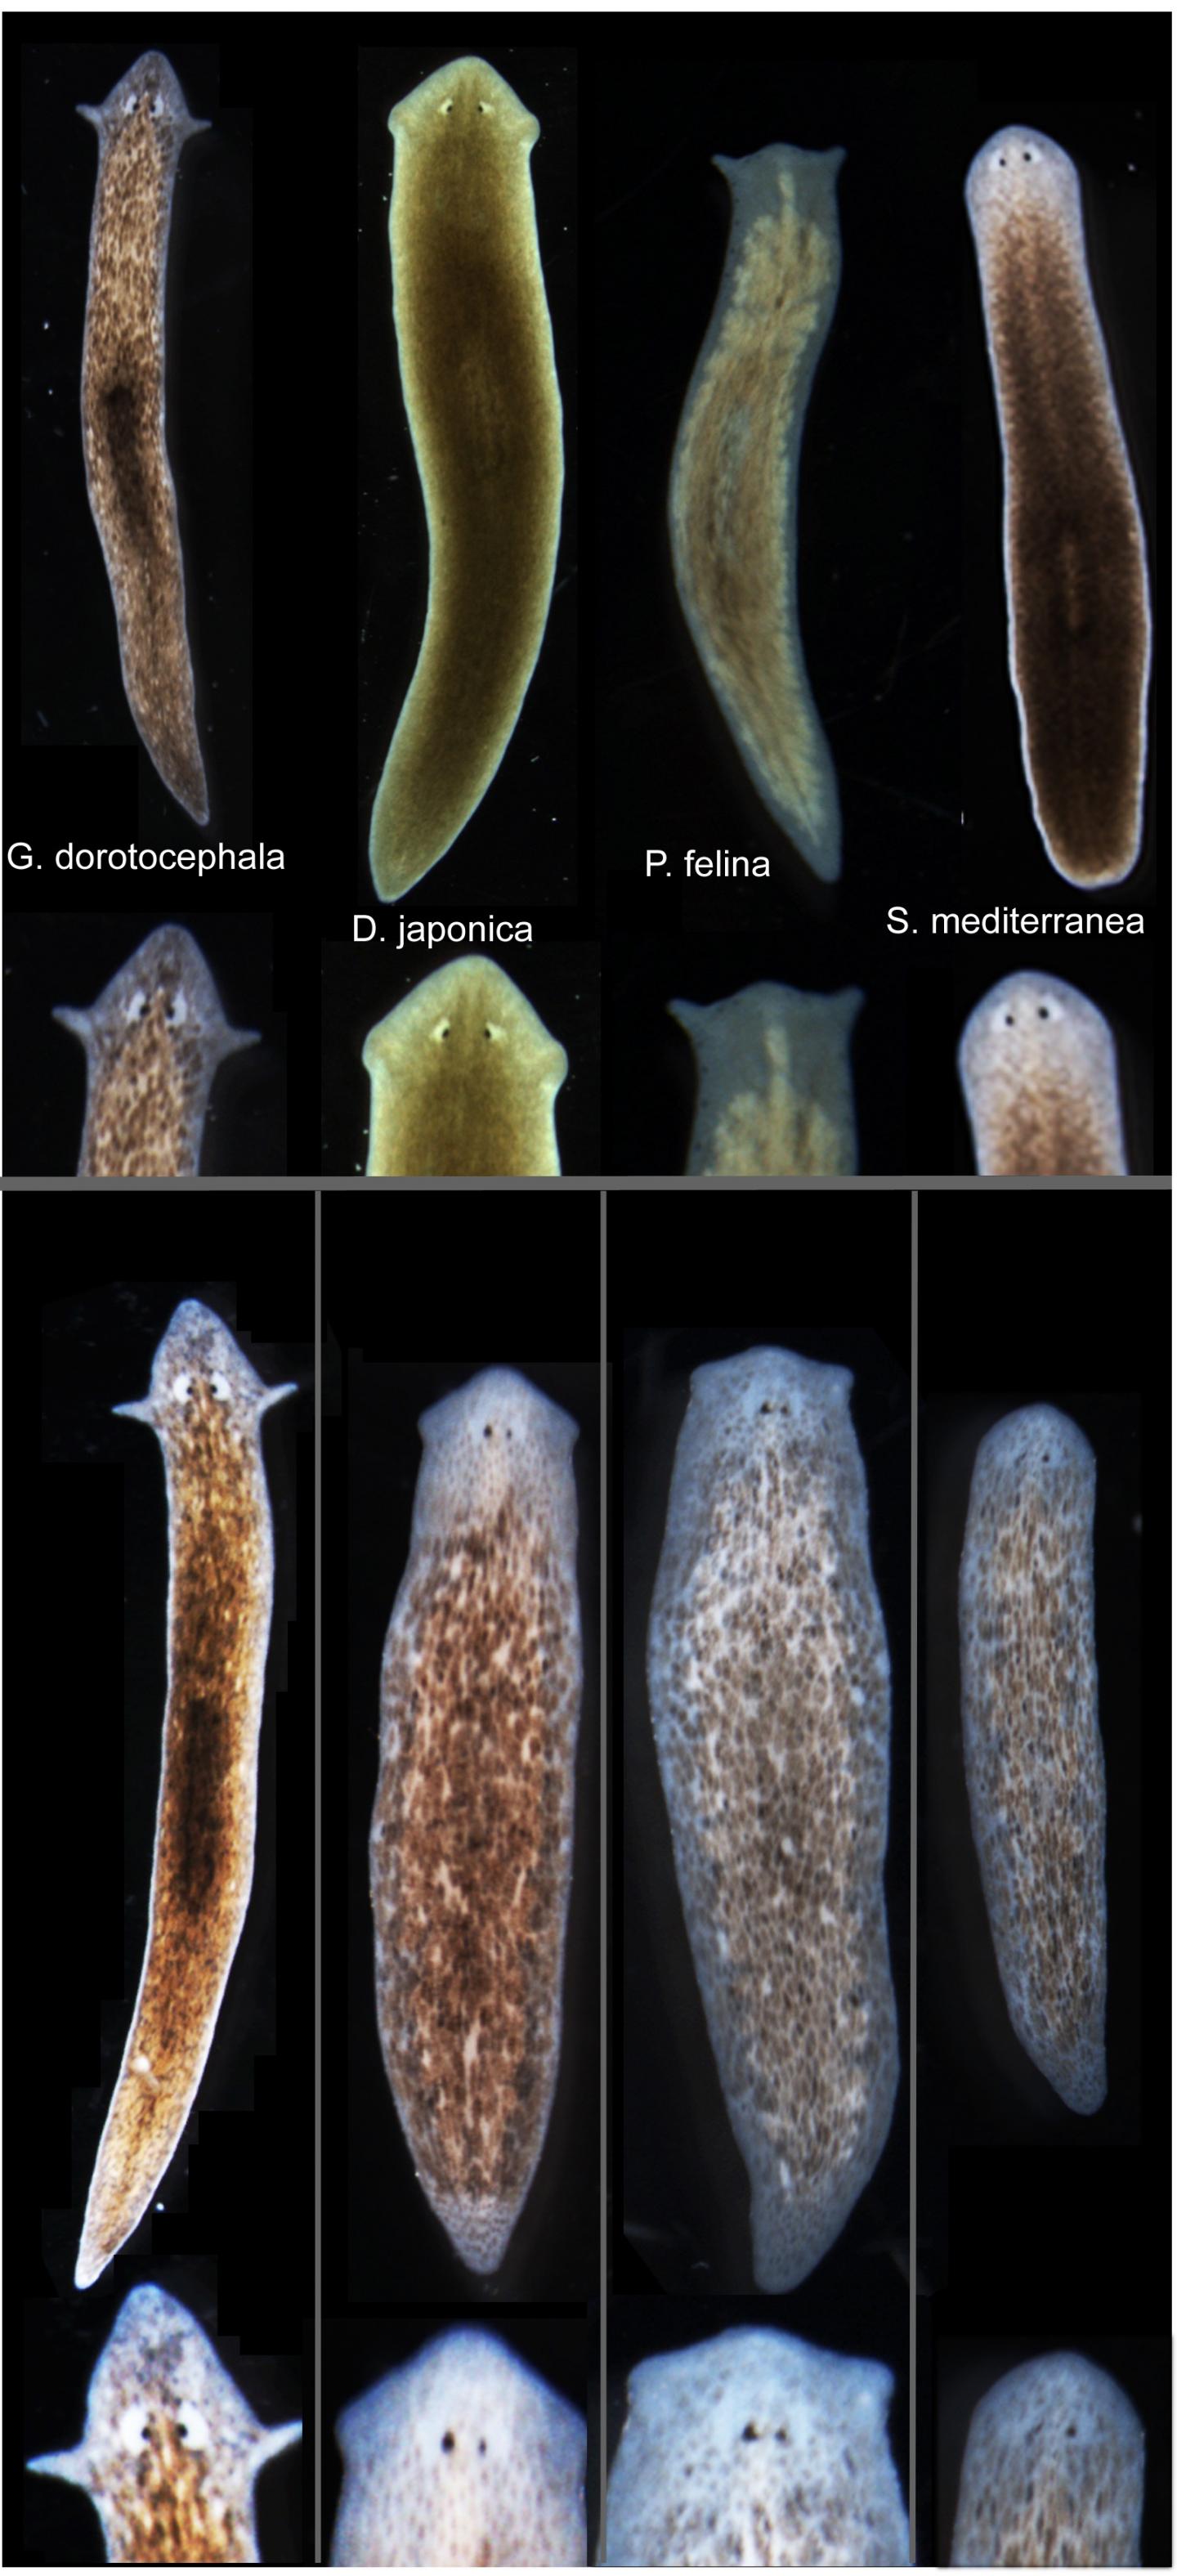 Biologists Induce Flatworms to Grow Heads and Brains of Other Species